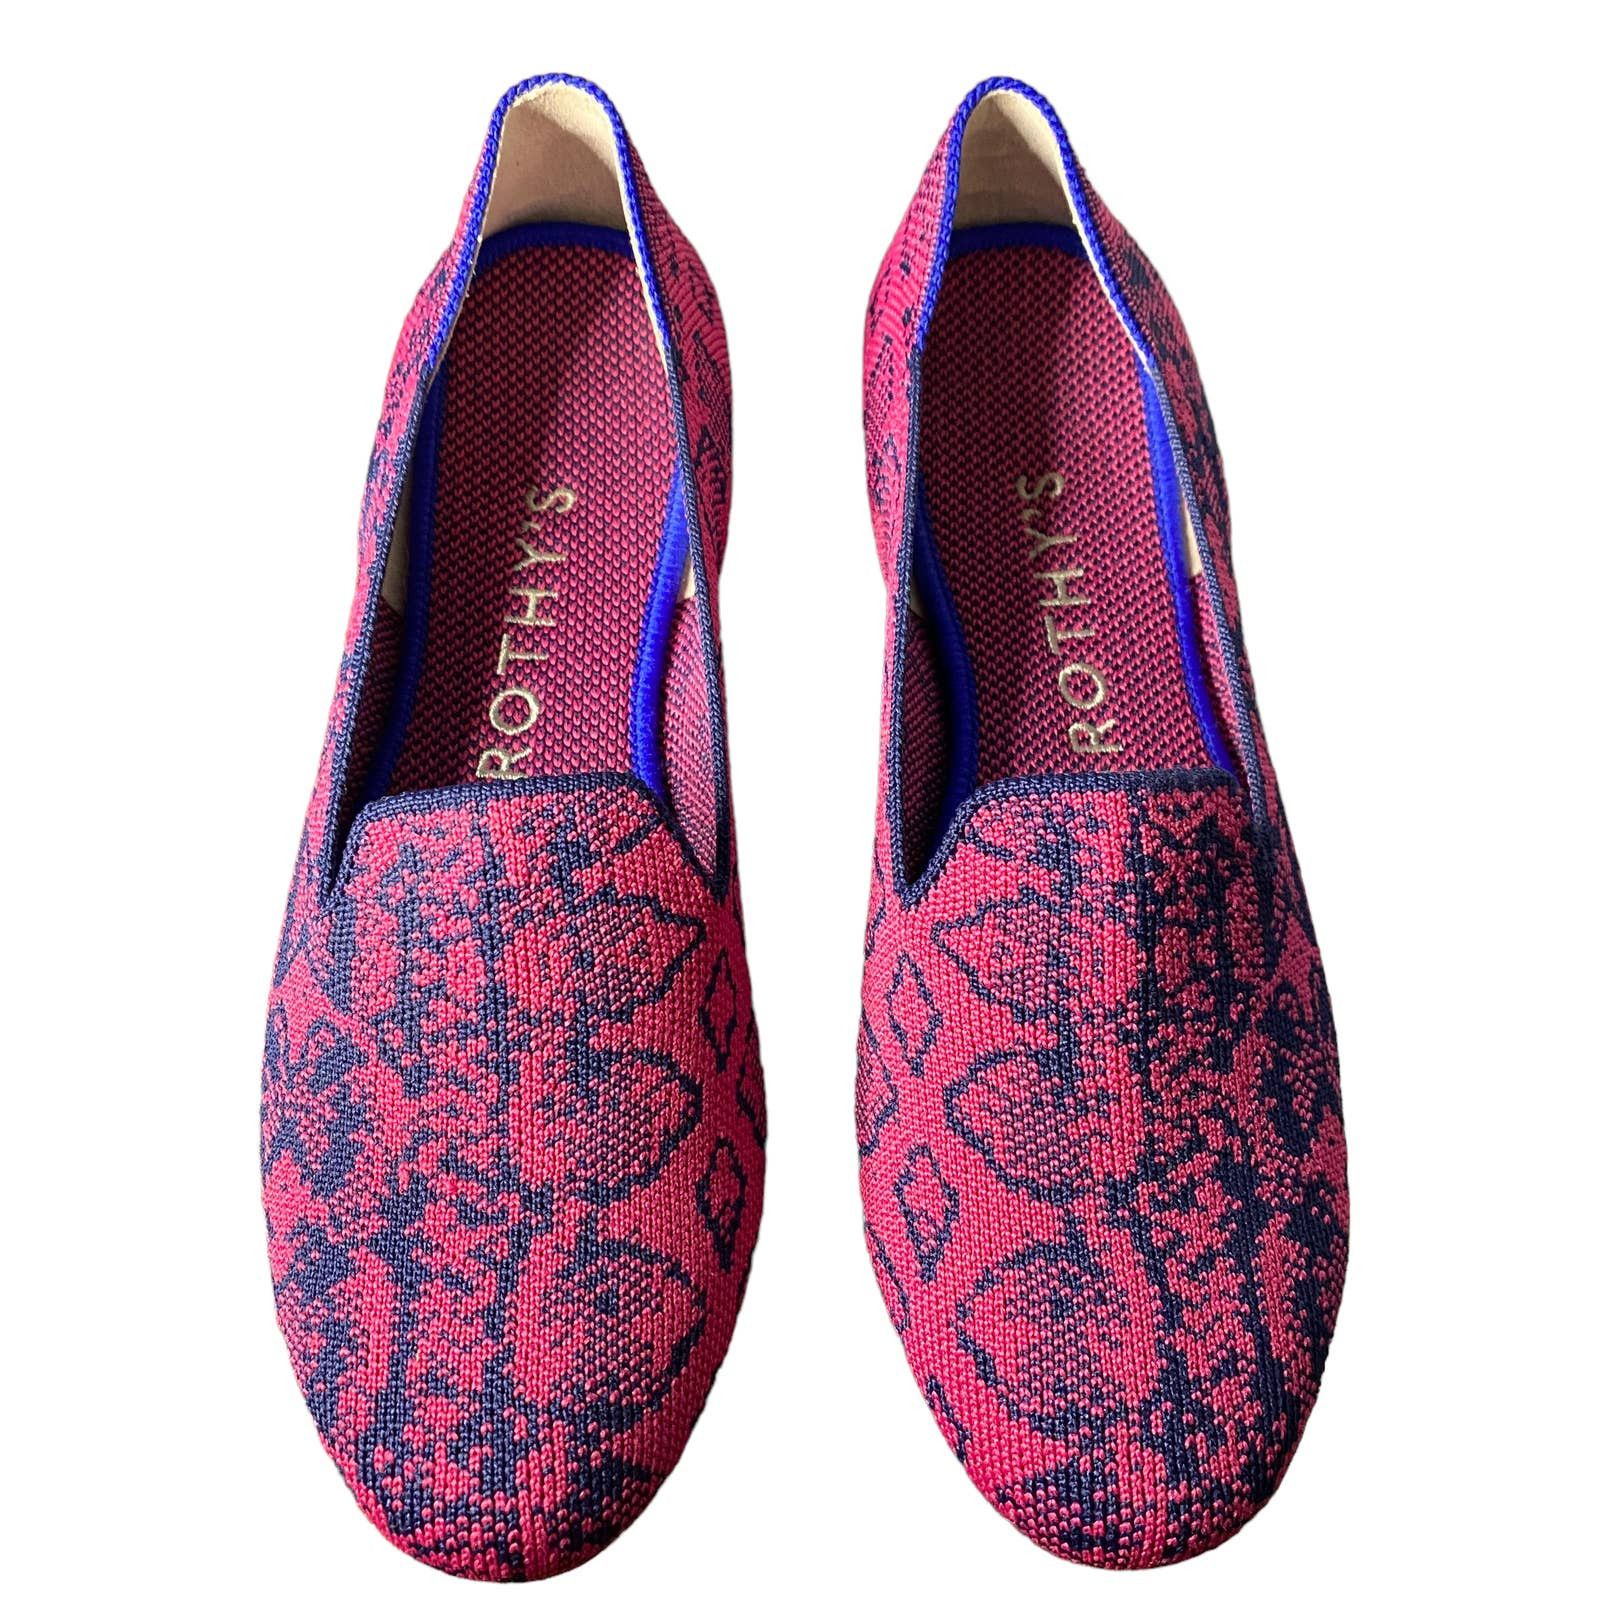 Other Rothy's Retired Fuchsia and Navy Snake Print Loafer Size 7 Size US 7 / IT 37 - 2 Preview